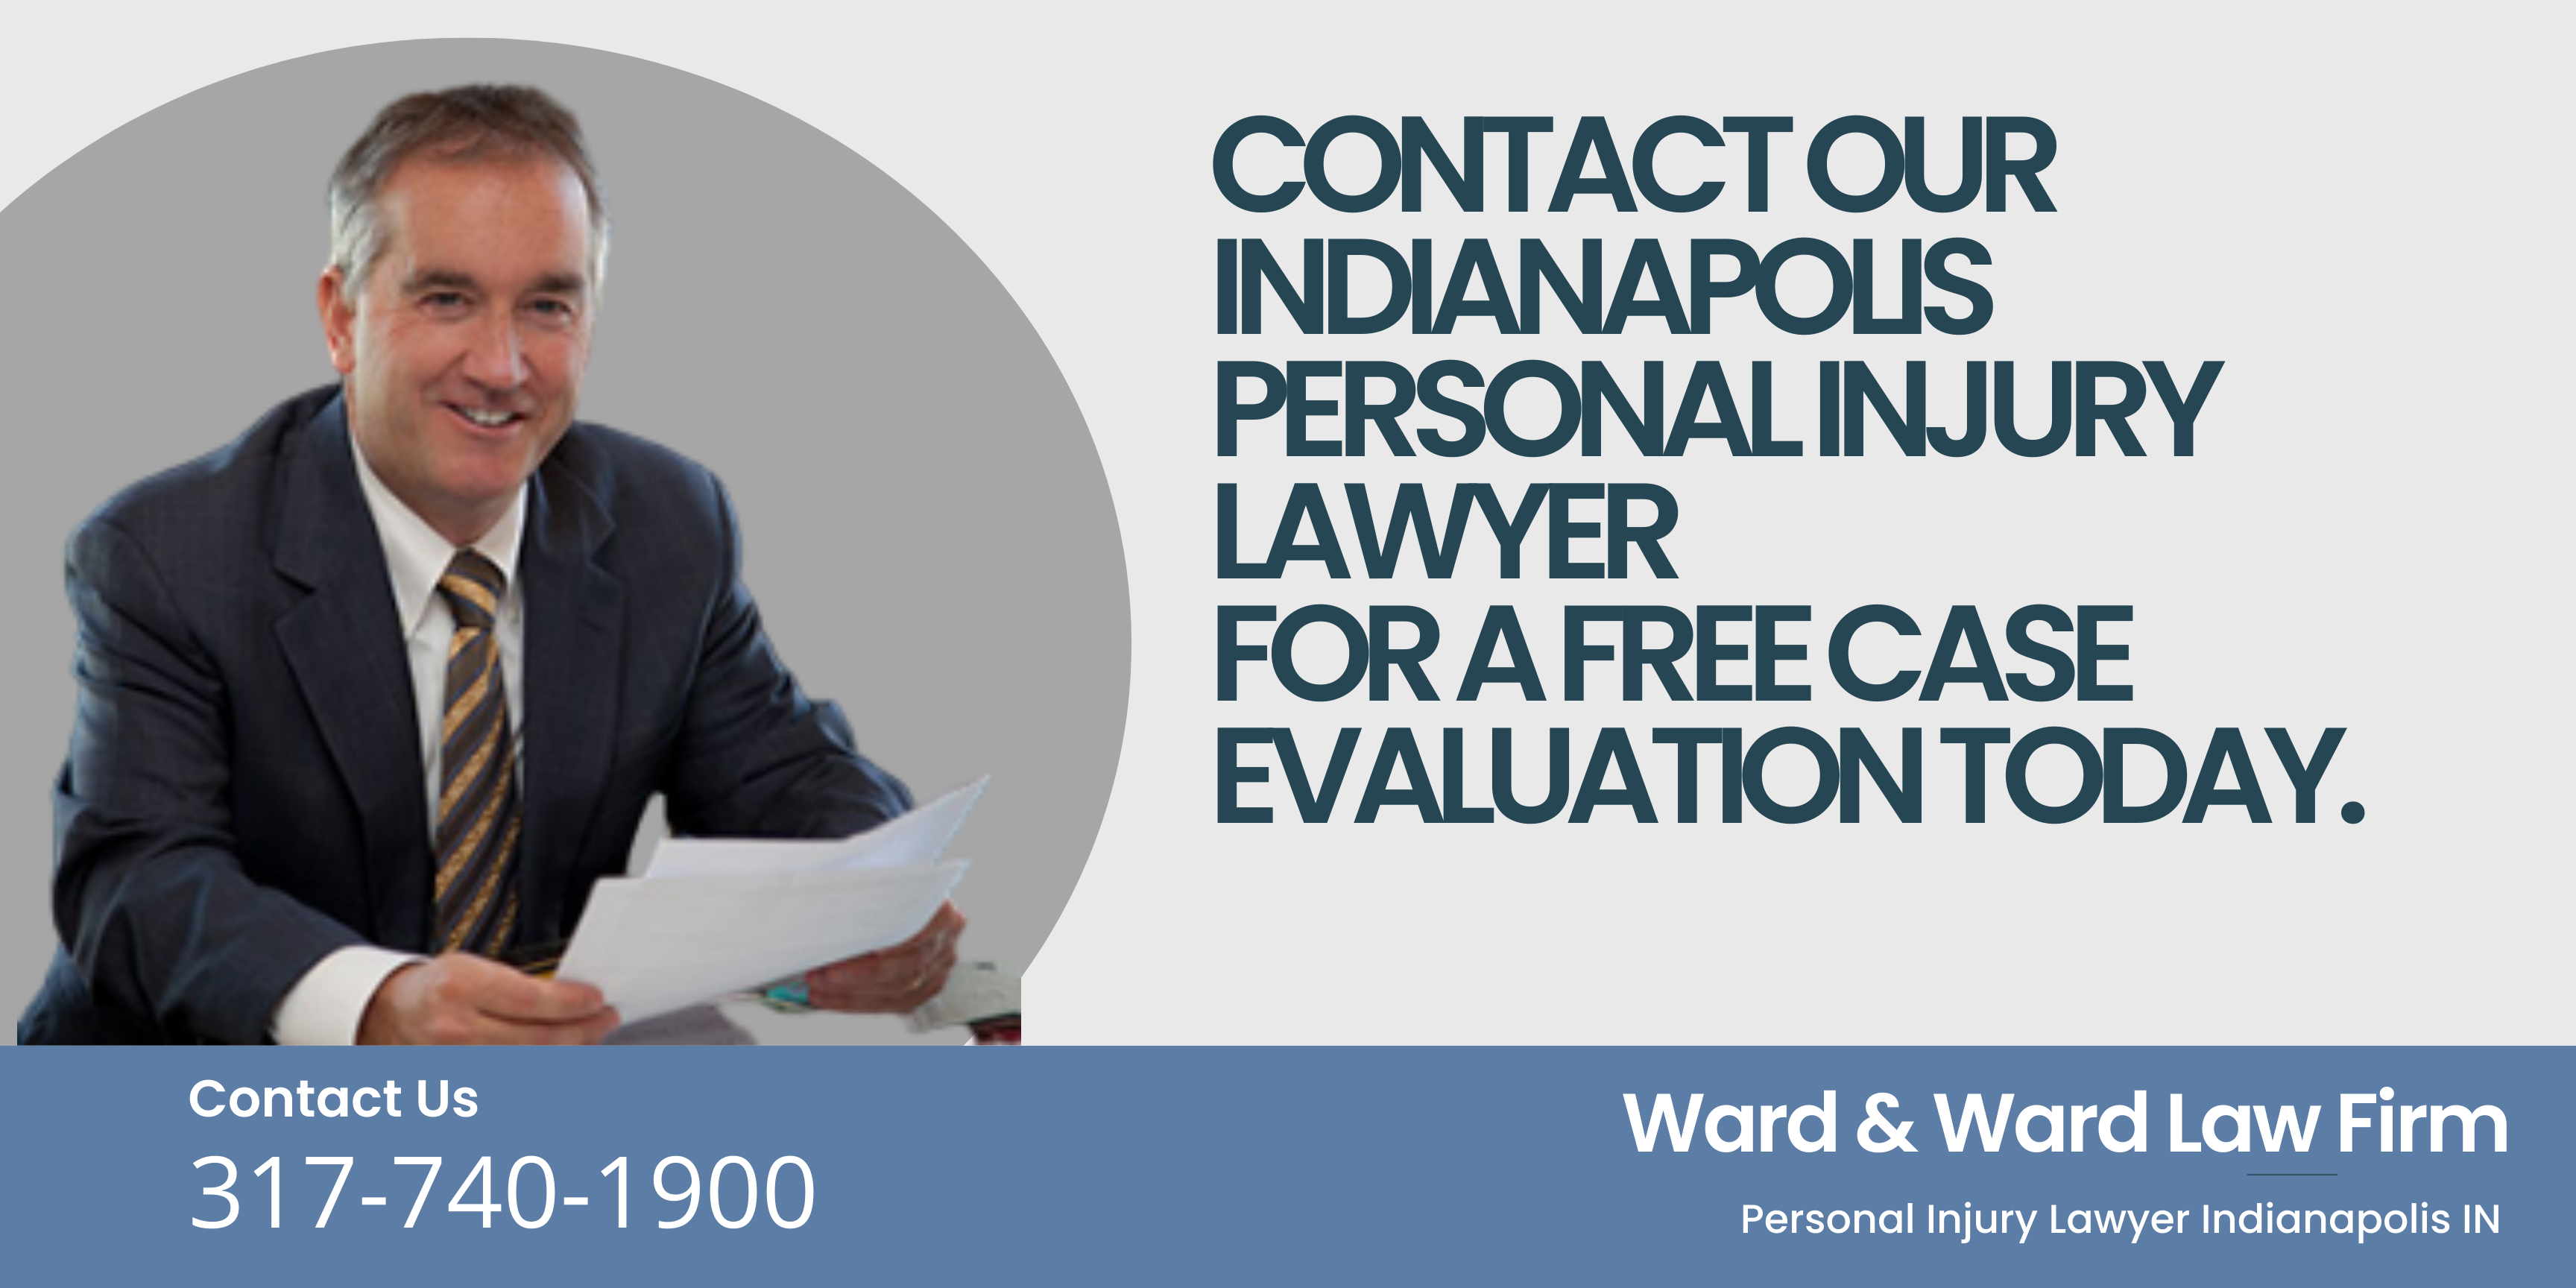 contact our Indianapolis Personal Injury Lawyer